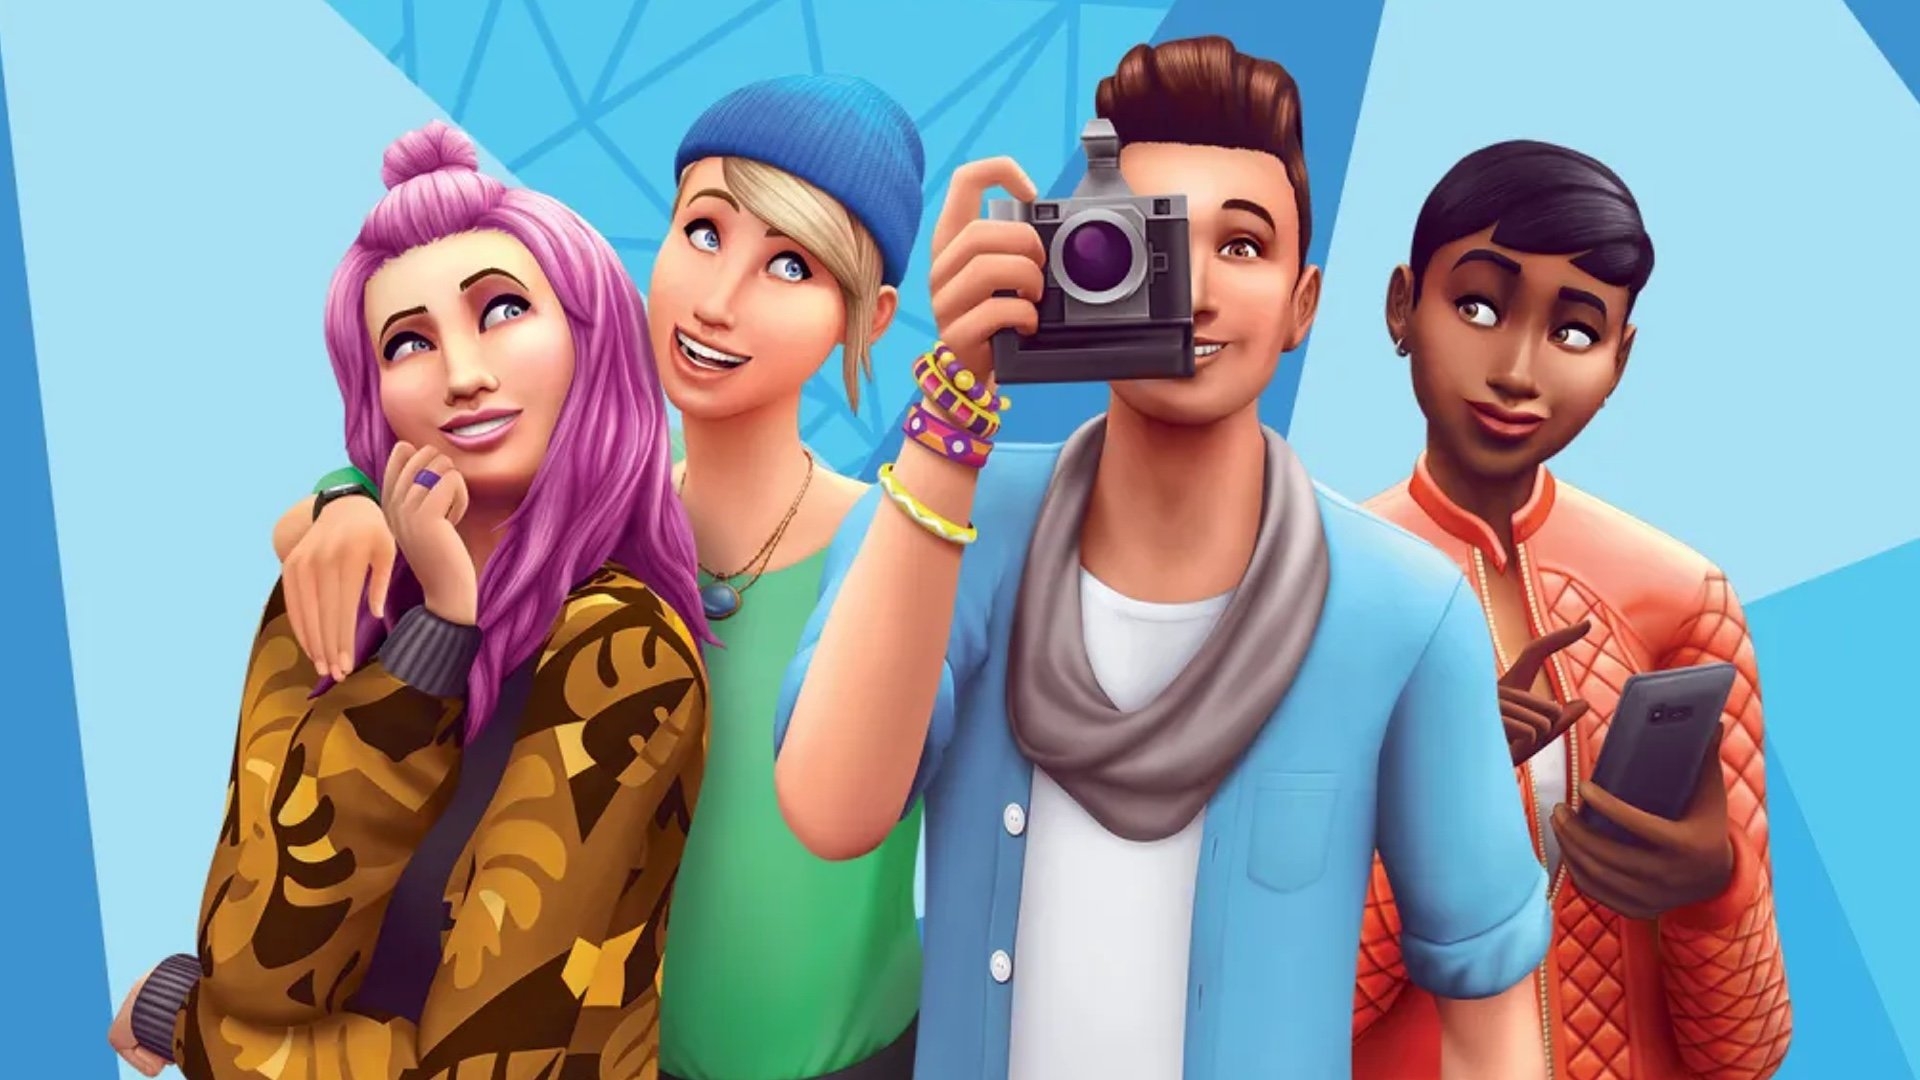 A live-action film adaption of "The Sims" game is in the works.